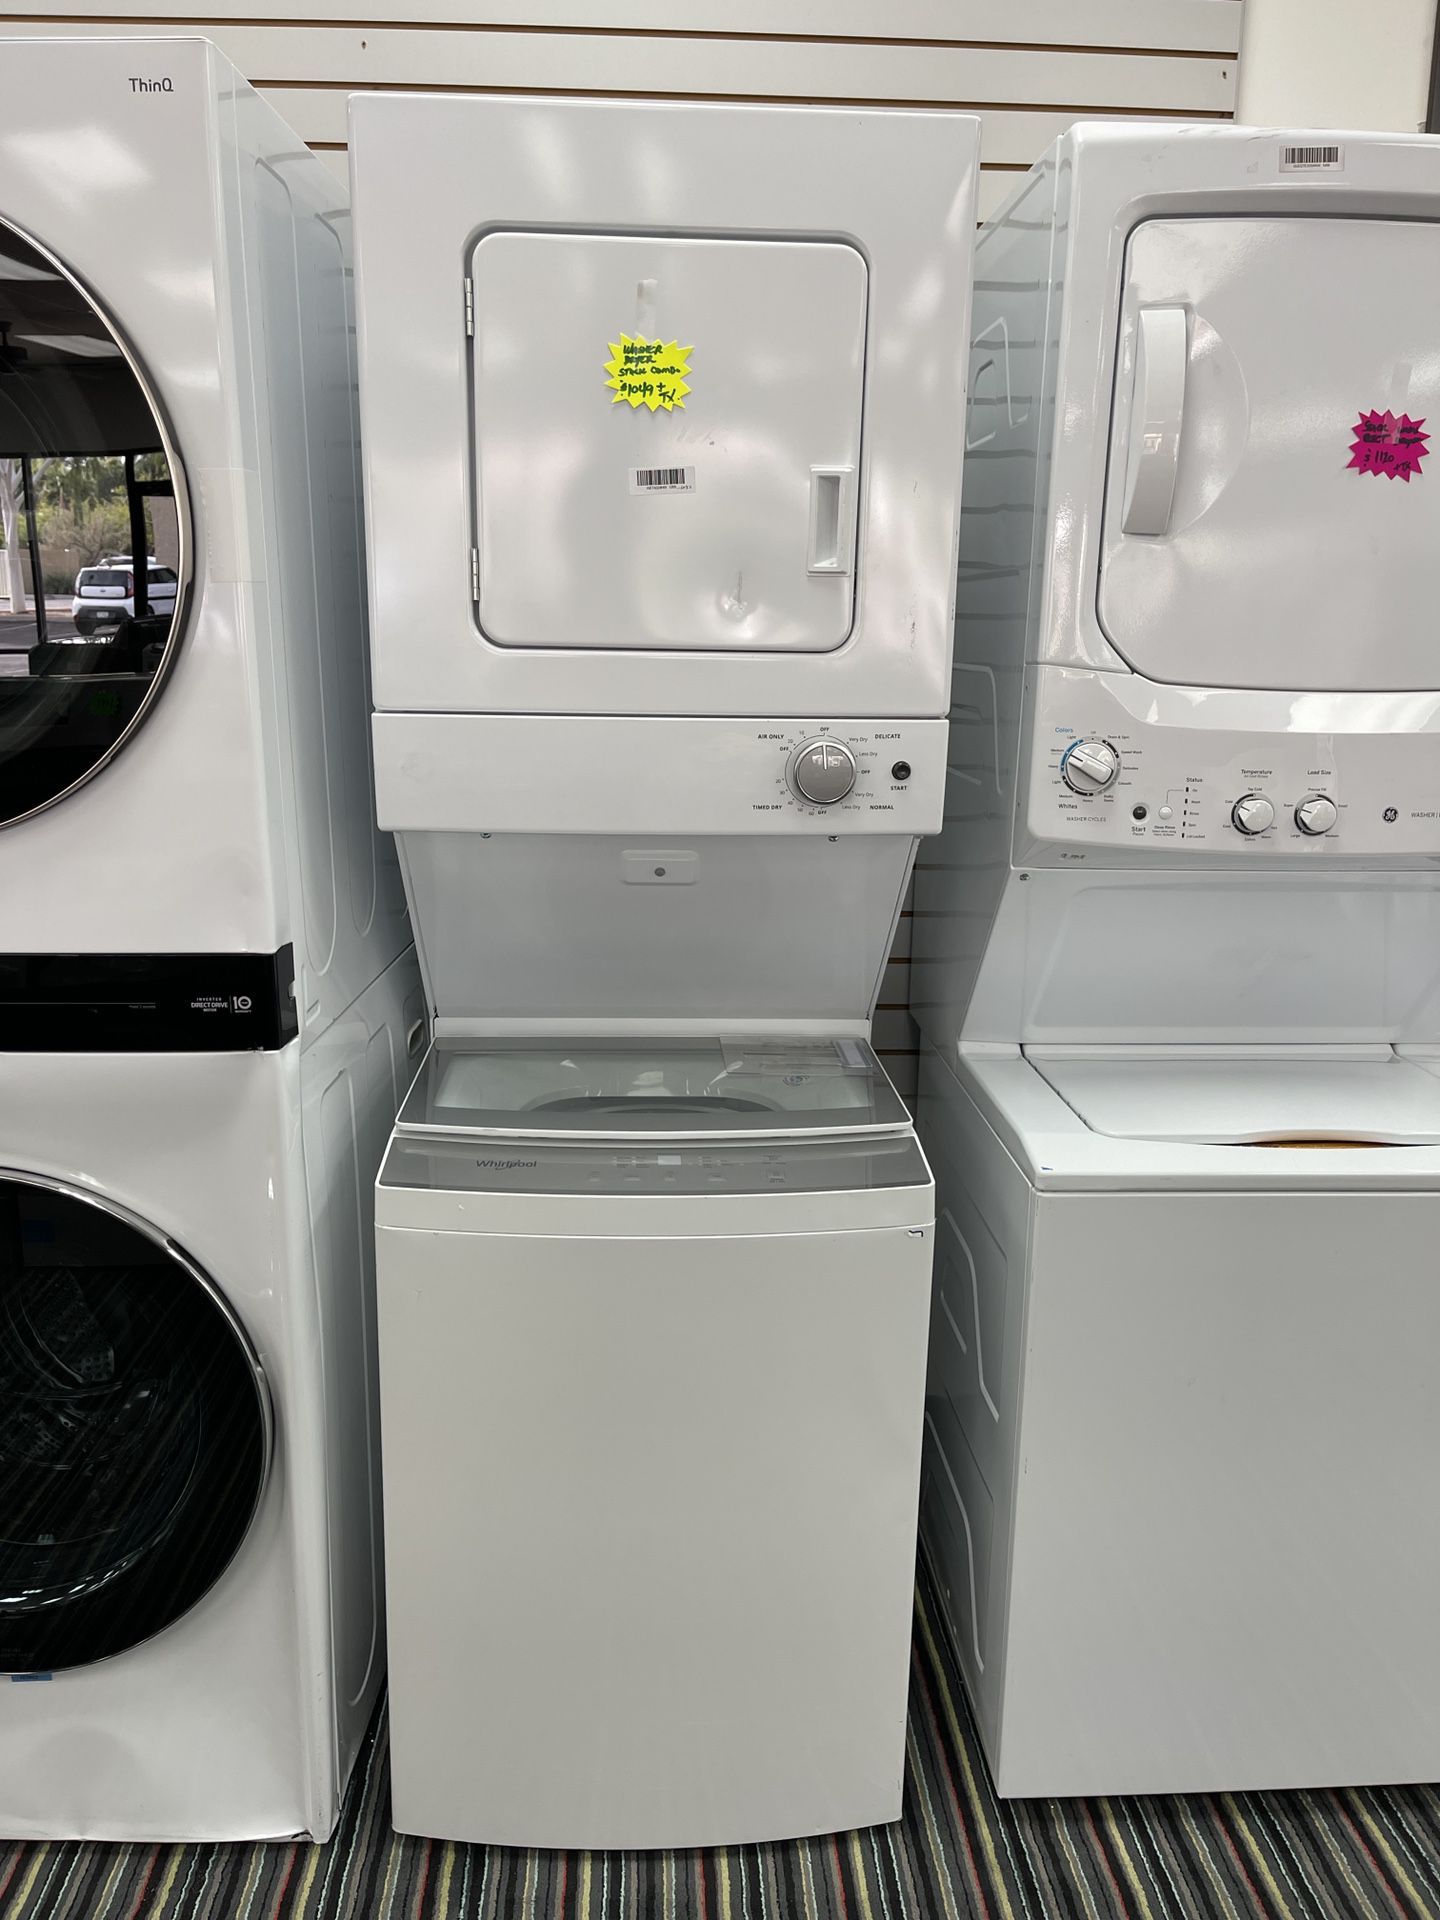 New Whirlpool Stacked Washer And Electric Dryer